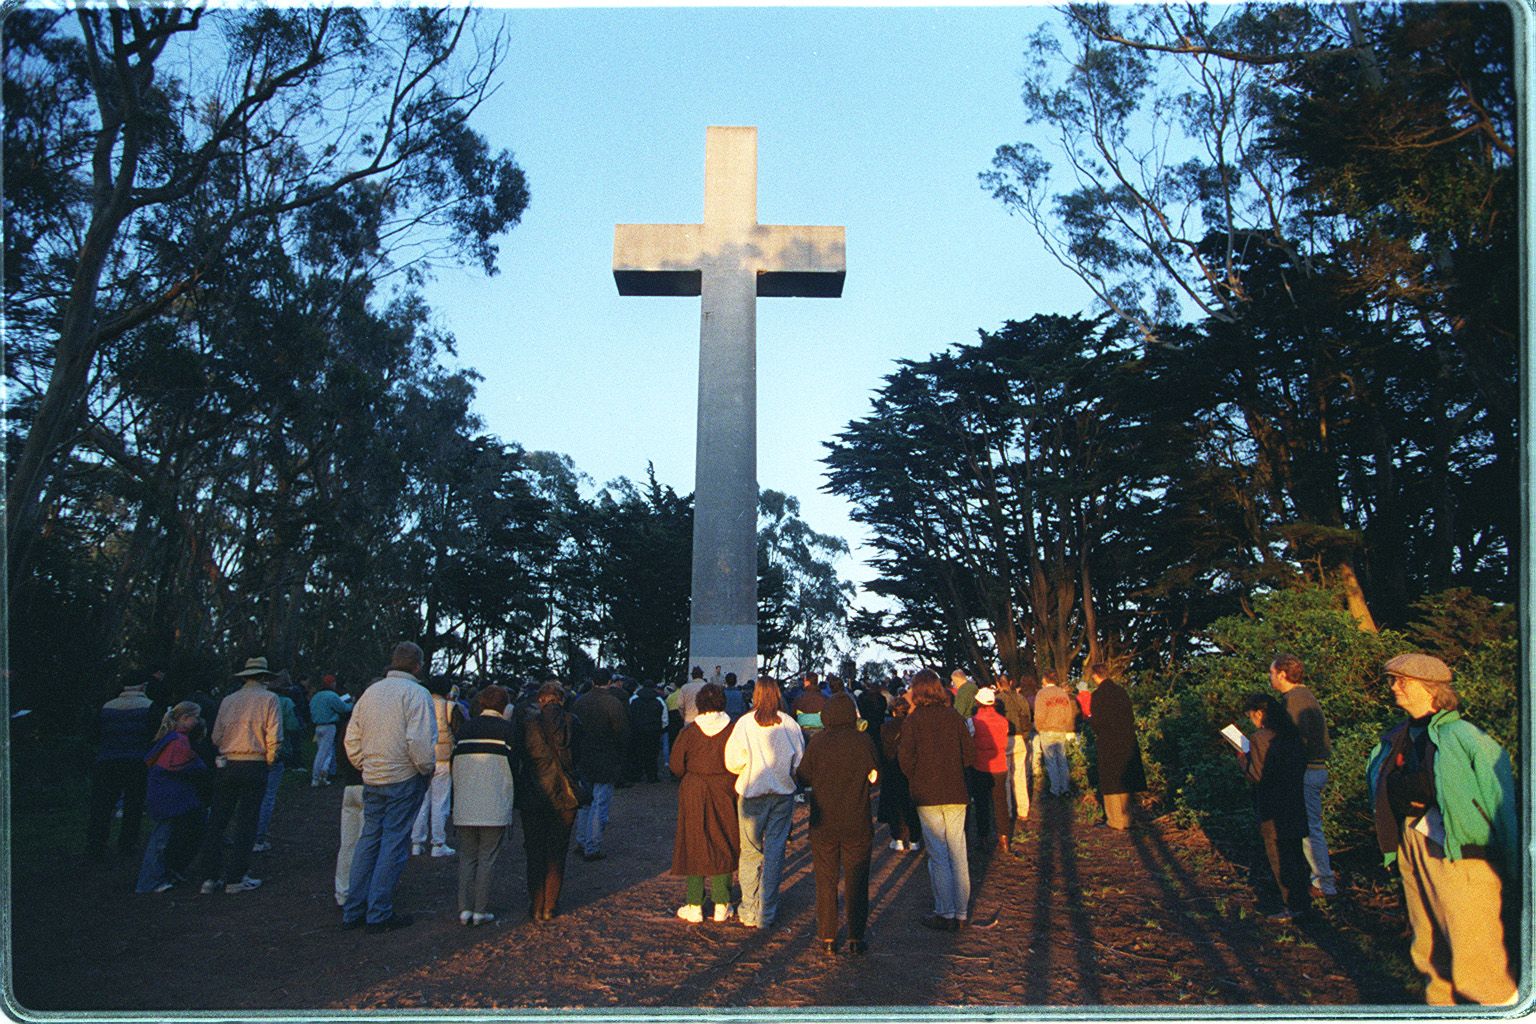 group of people at the easter sunrise service in front of giant cross among trees